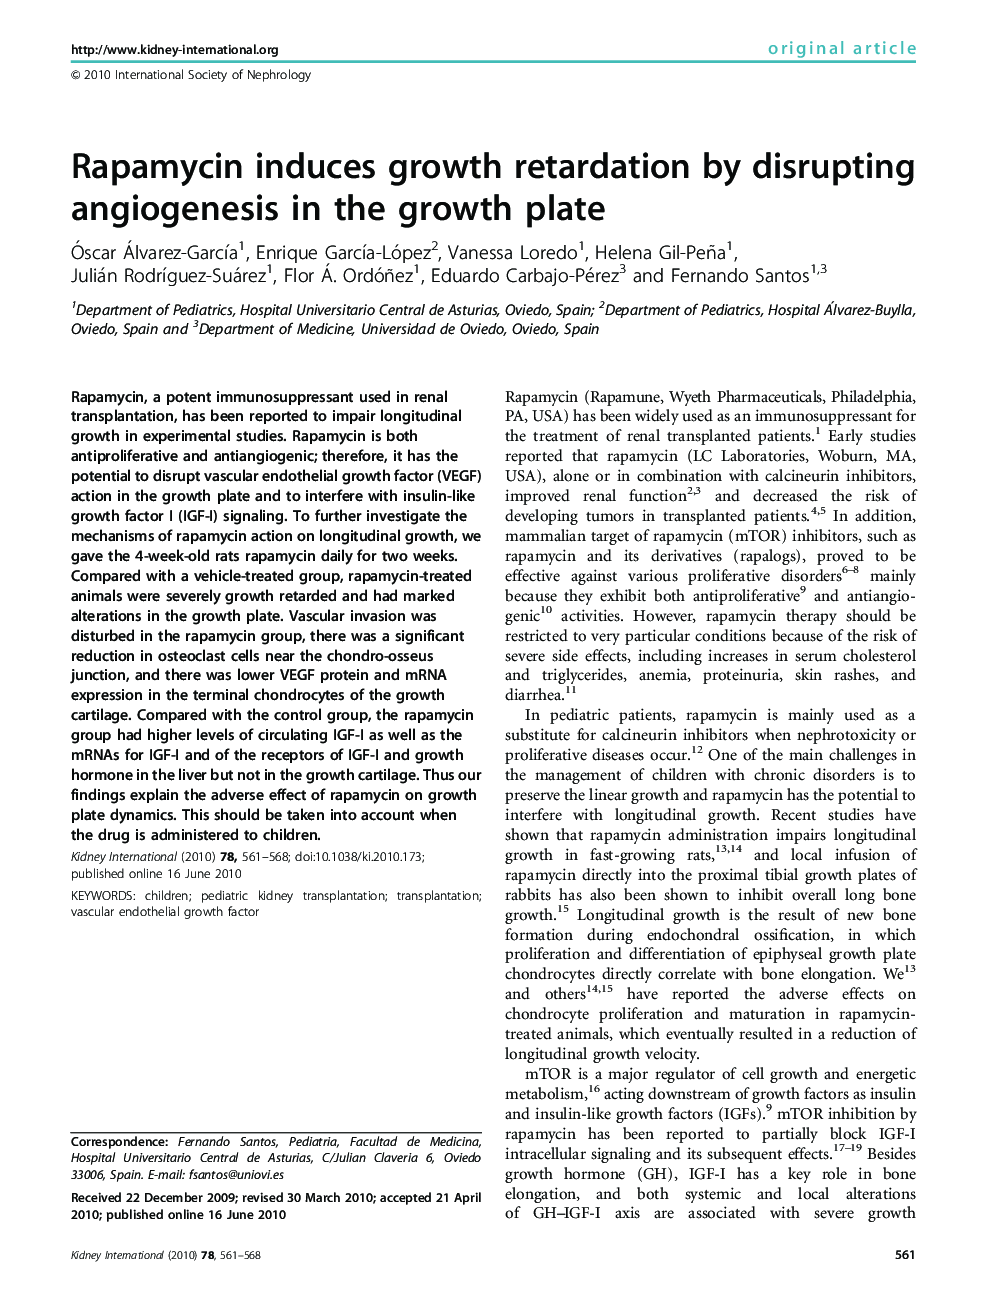 Rapamycin induces growth retardation by disrupting angiogenesis in the growth plate 